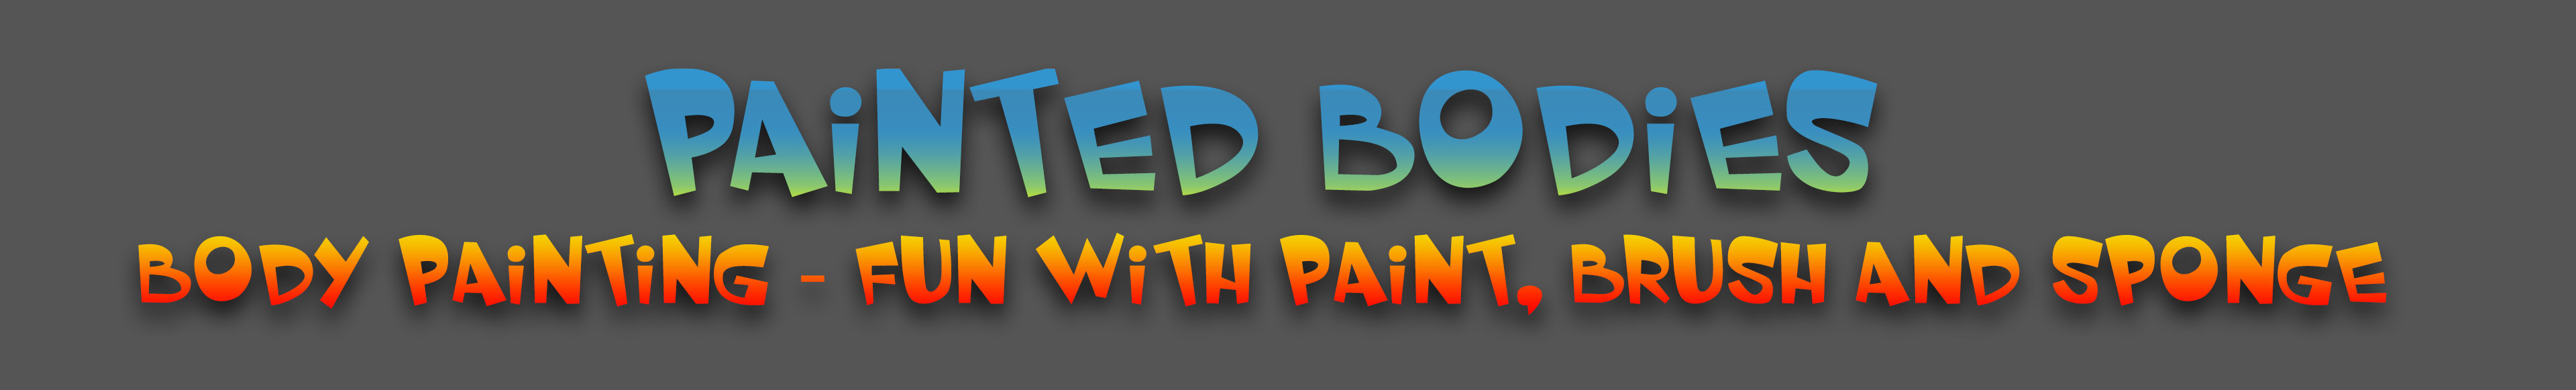 PAINTED BODYS